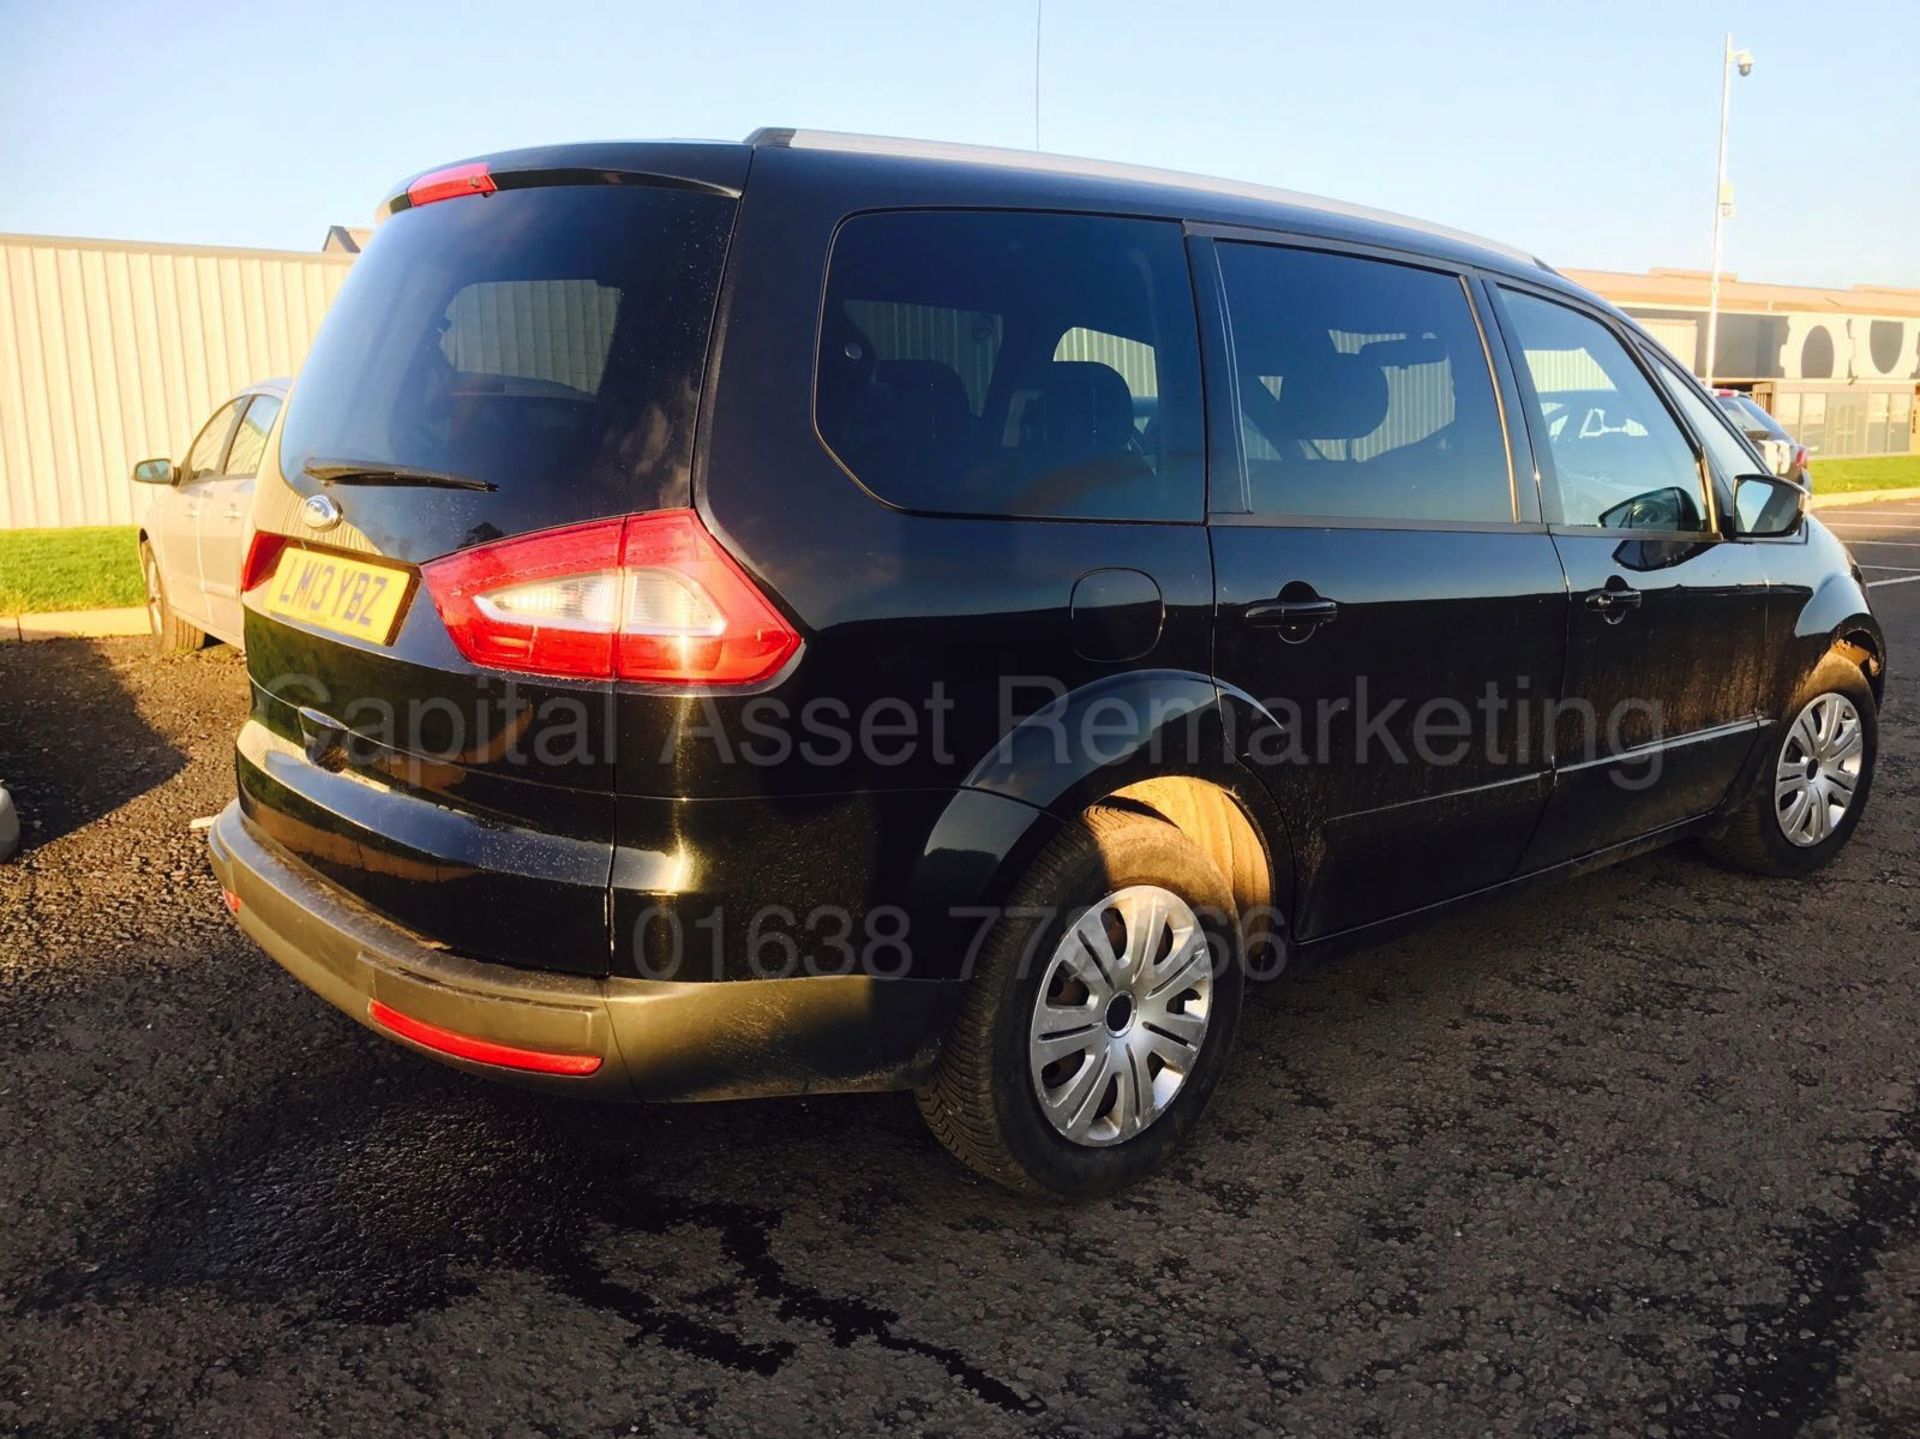 FORD GALAXY 'ZETEC' 7 SEATER (2013 - 13 REG) 2.0 TDCI - 140 BHP POWER SHIFT (1 OWNER) *FULL HISTORY* - Image 5 of 14